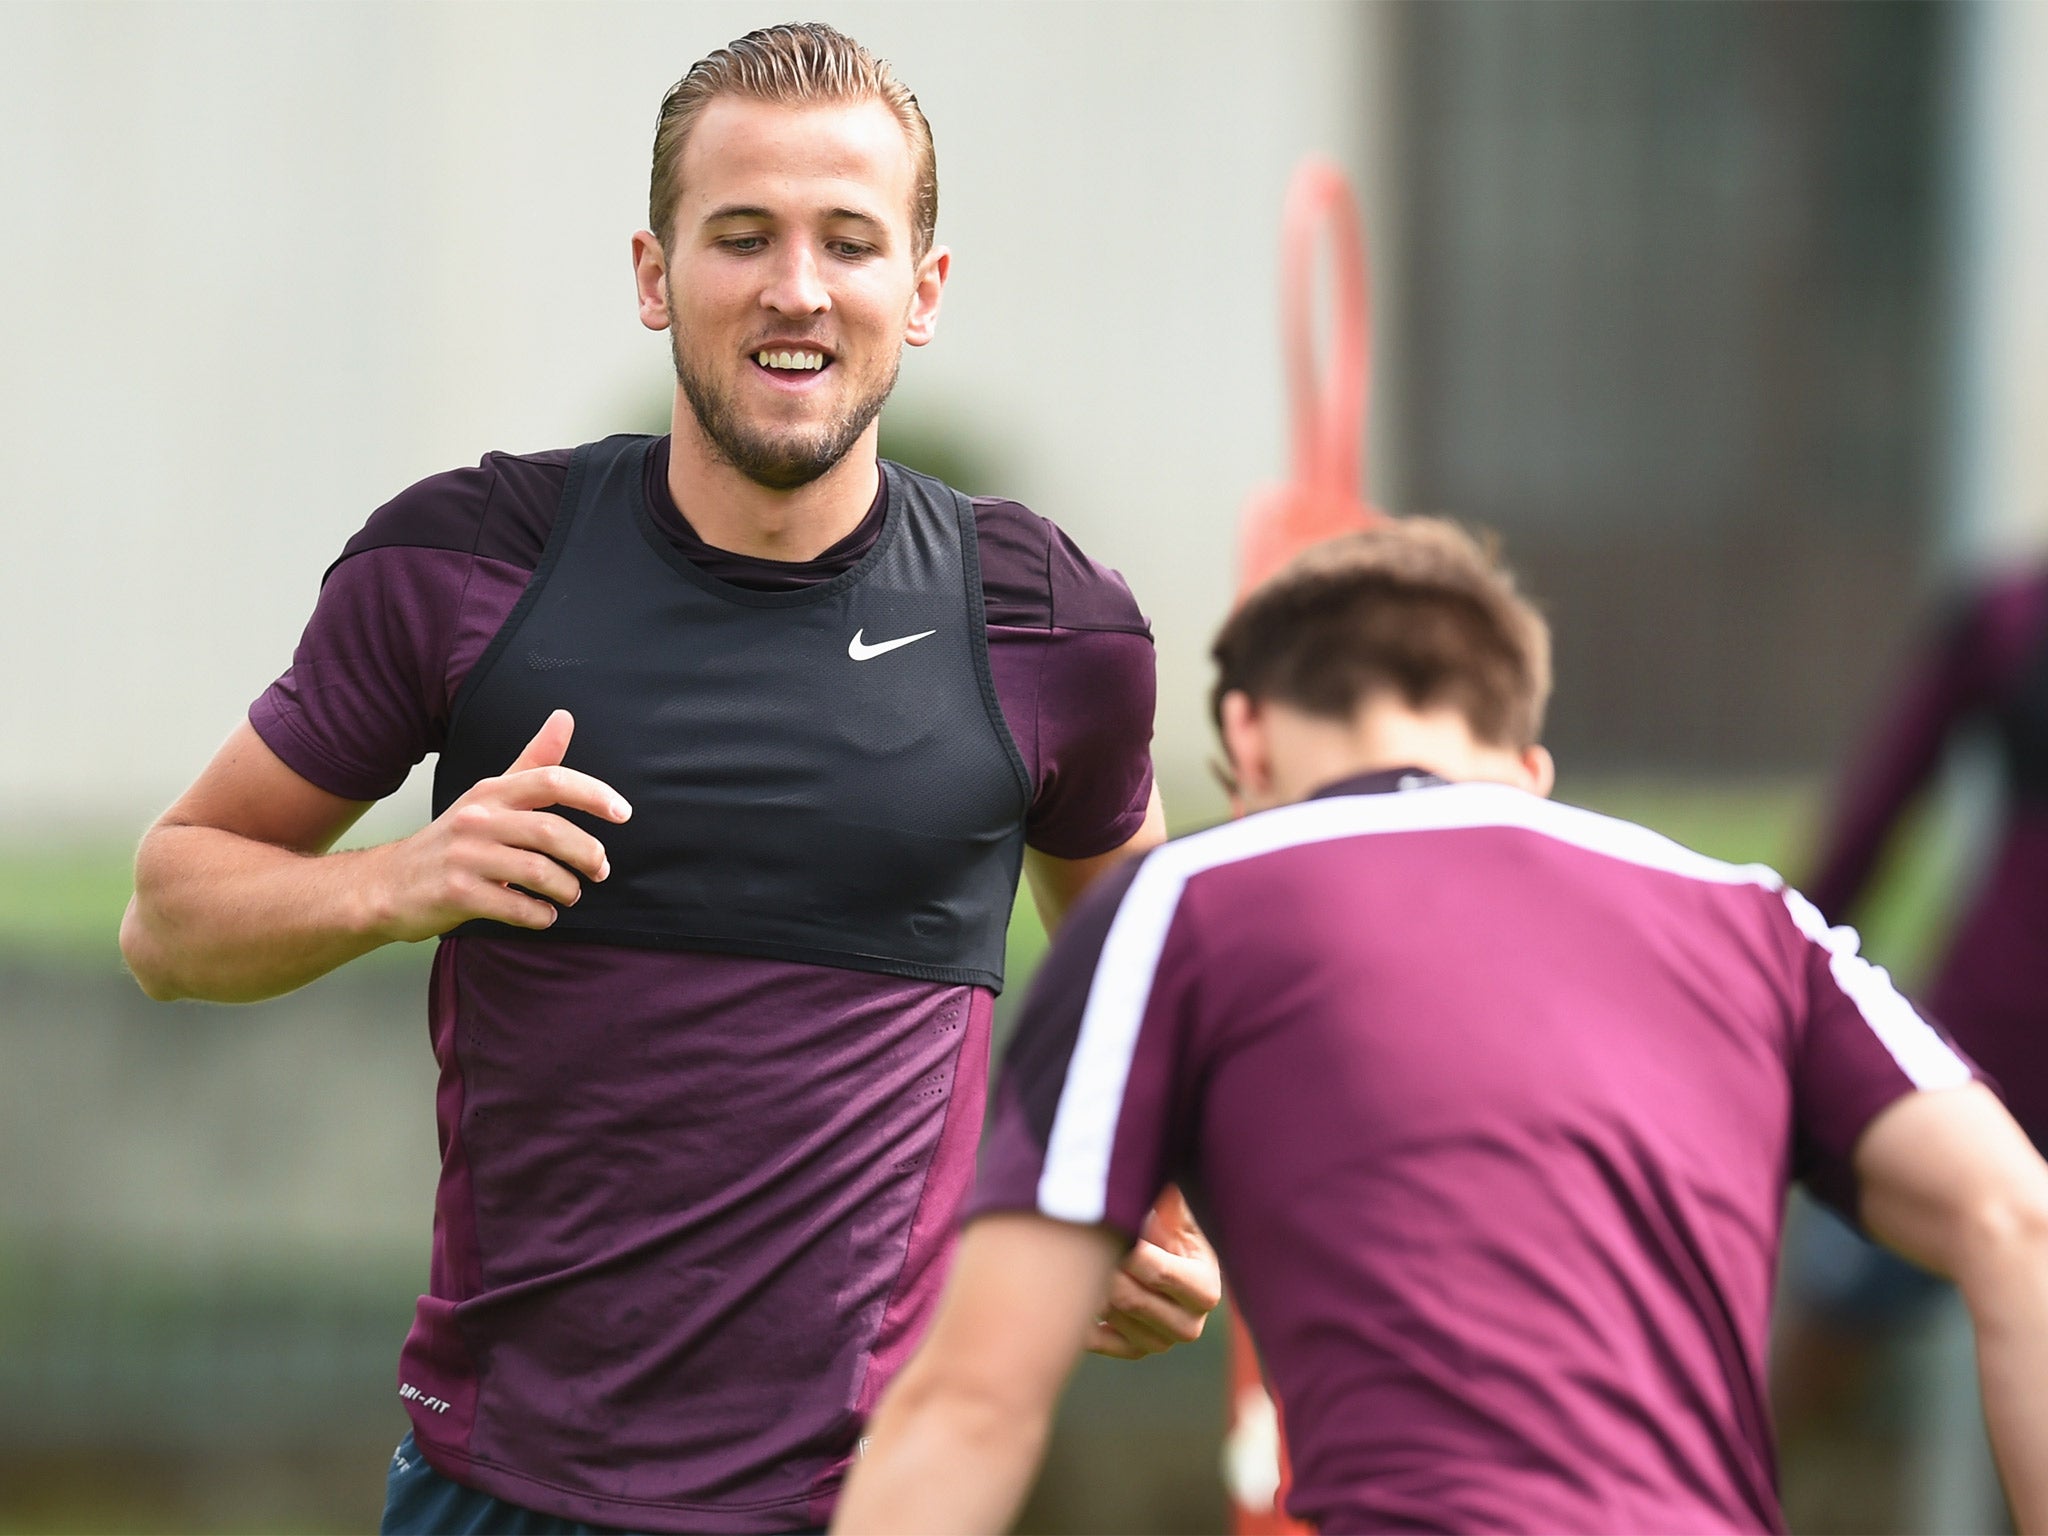 Harry Kane during the England Under-21 training session in Olomouc, Czech Republic